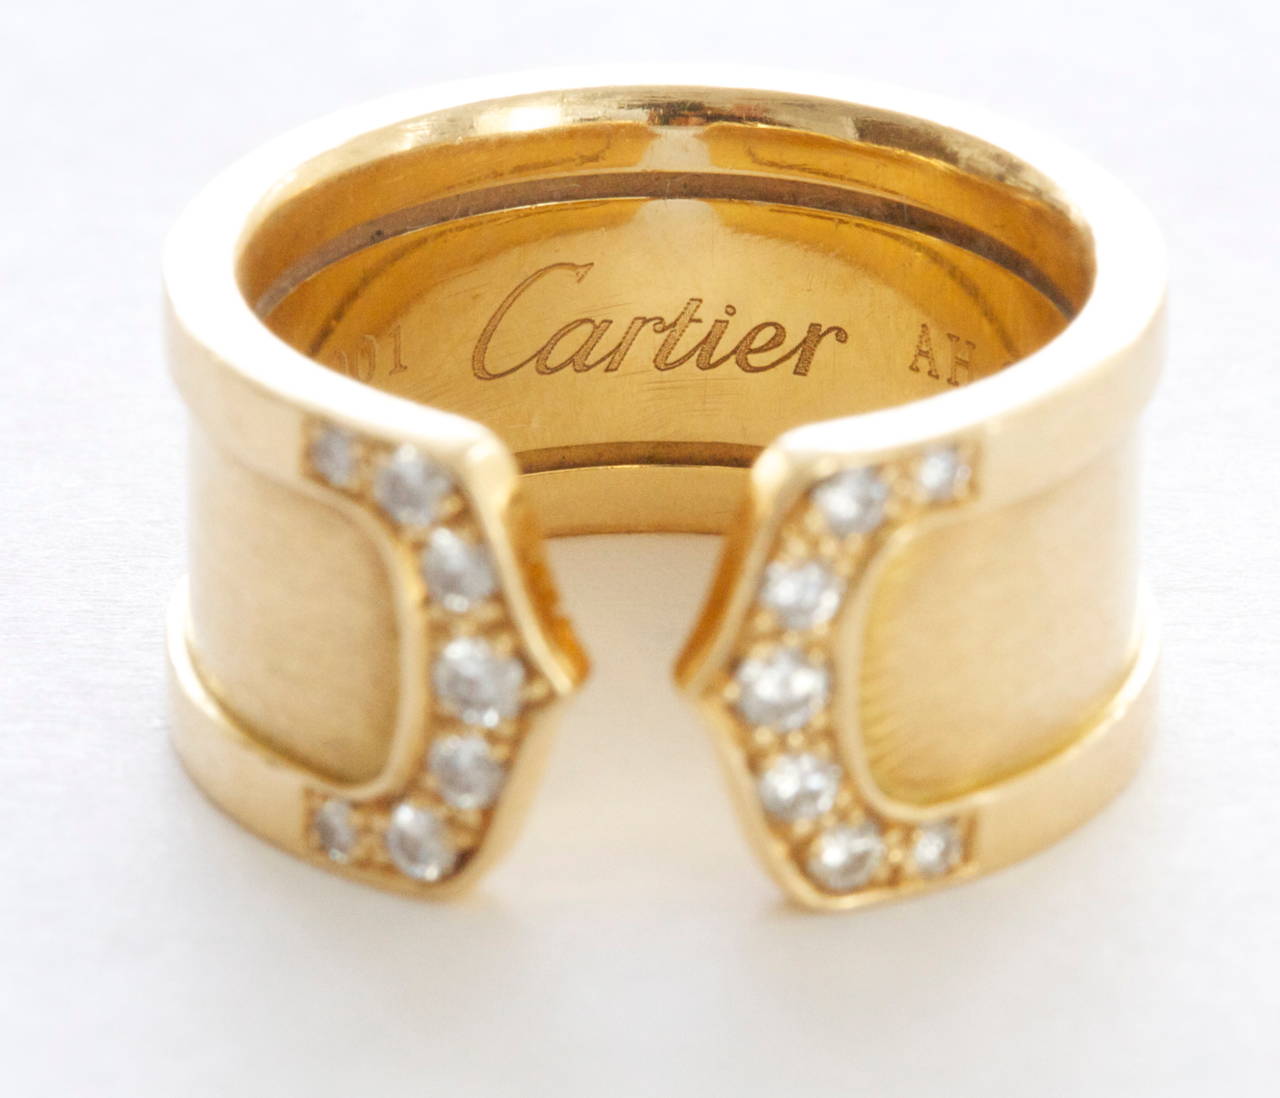 Cartier, elegant and timeless. The ring has been designed with 14 near colorless diamonds that form the classic C motif on either side. Crafted in 18k yellow gold. Signed Cartier and numbered.

Size 50.